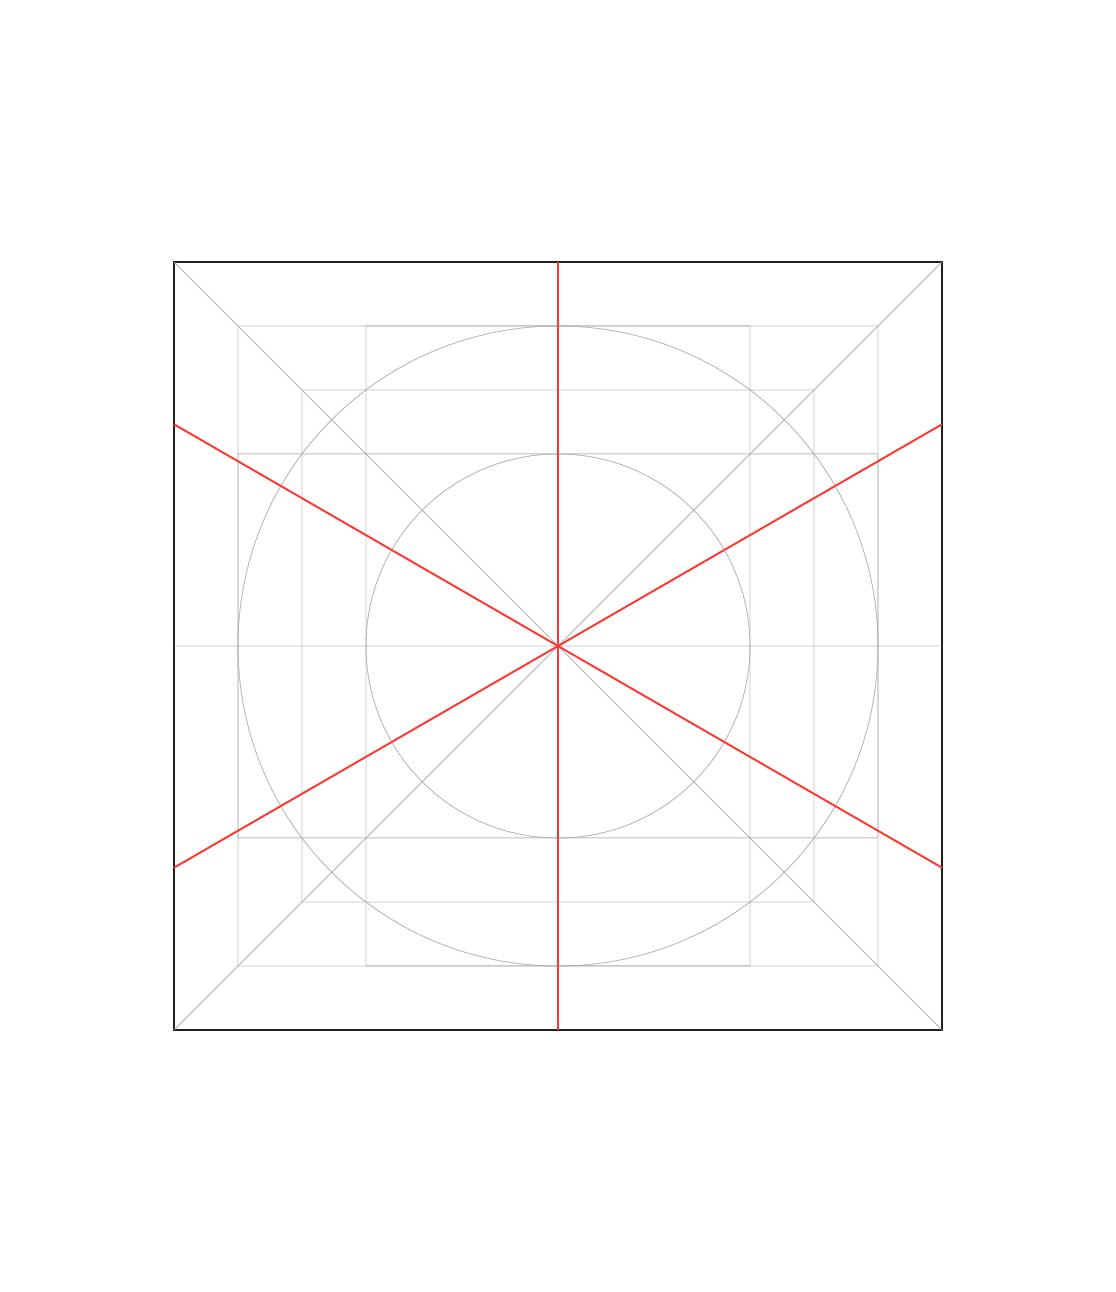 Within the established grid system, three lines dividing the square into six slices are highlighted in red.